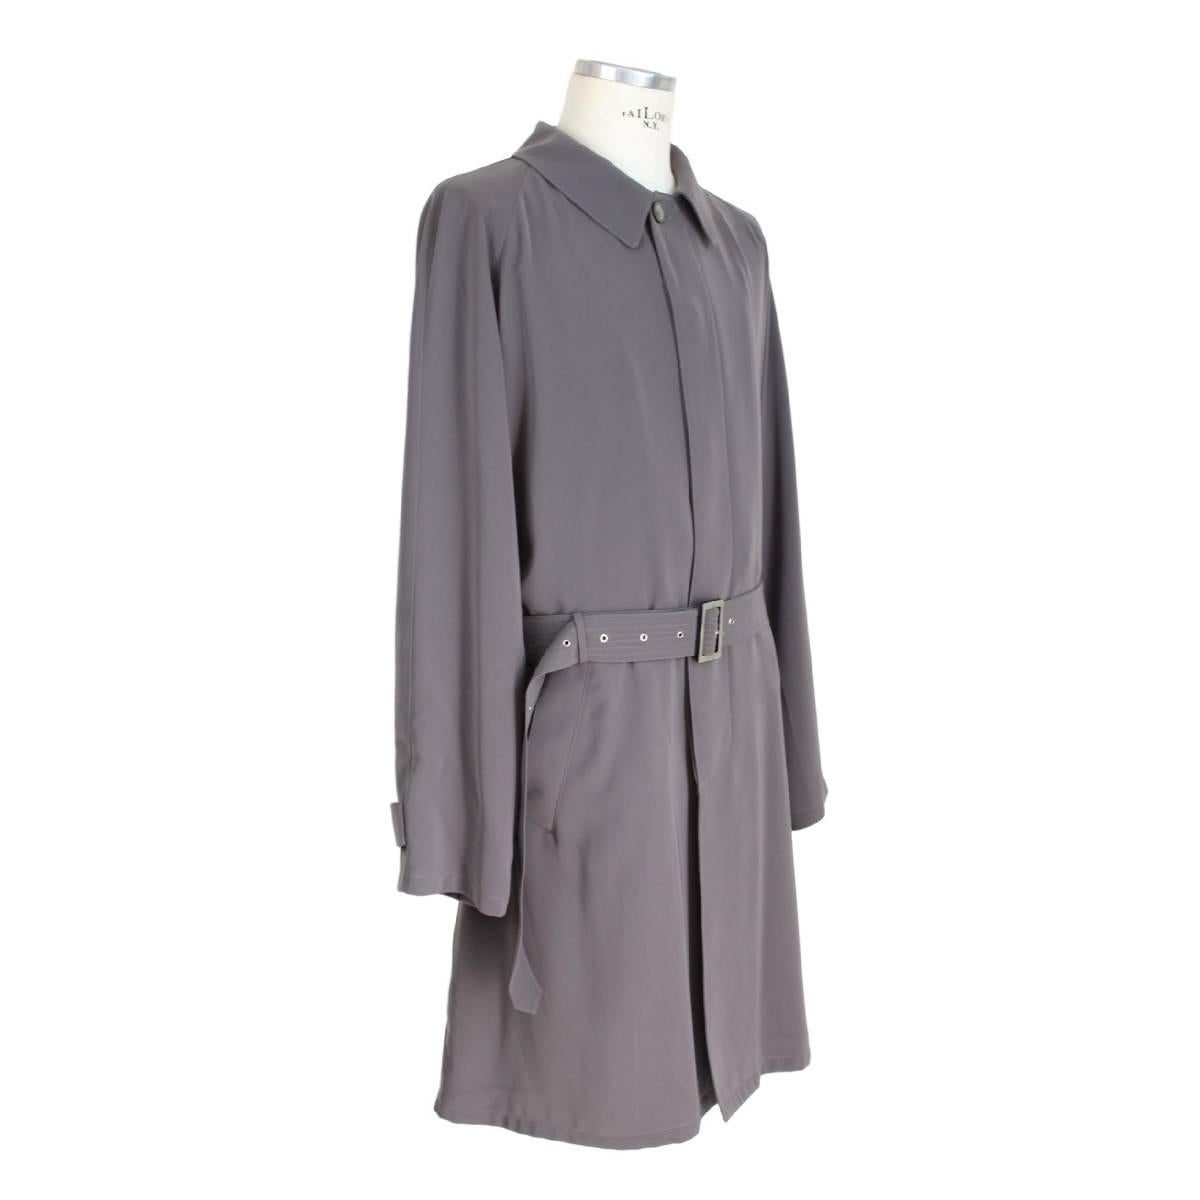 Giorgio Armani vintage trench coat gray pearl classico 56 1980s overcoat suit In Excellent Condition In Brindisi, IT